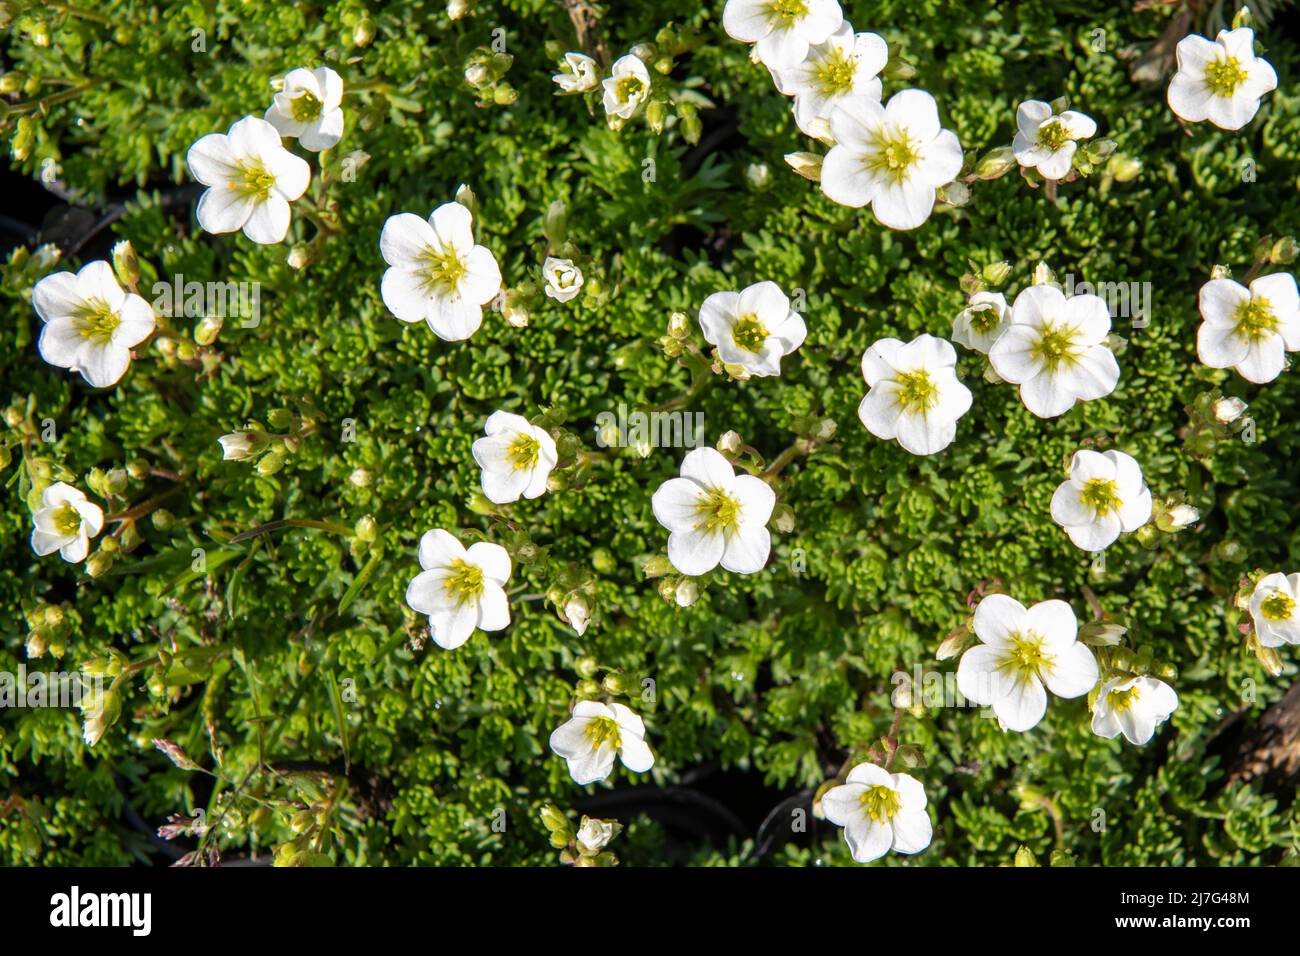 Top view close up shot of a white saxifraga arendsii plant. Rockery plant with adorable little white flowers. Stock Photo